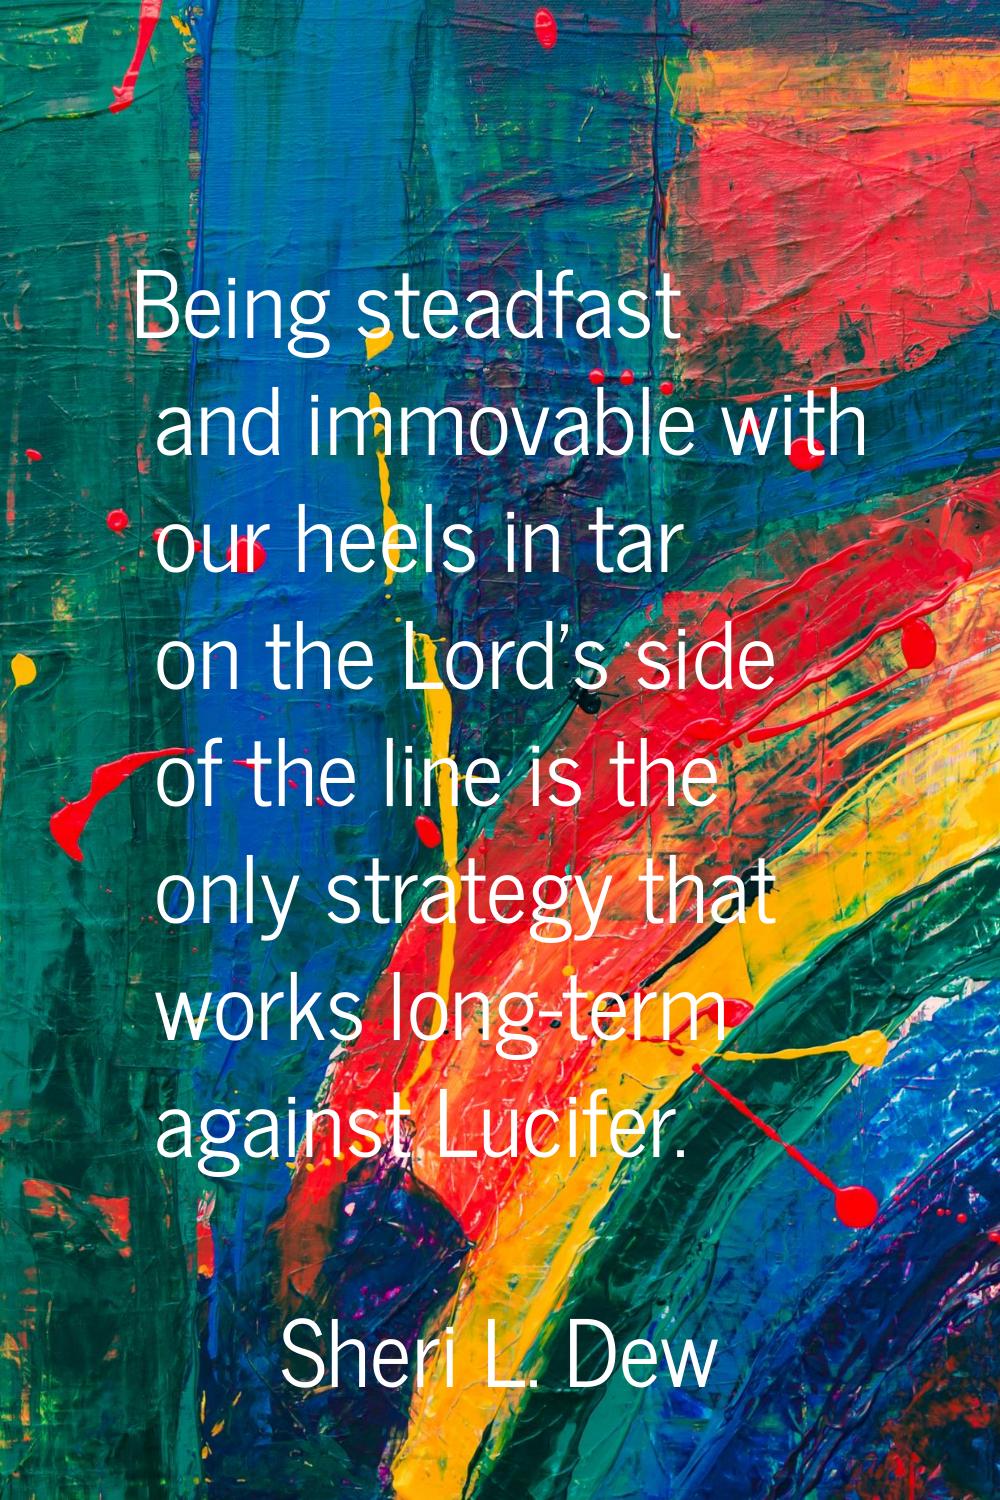 Being steadfast and immovable with our heels in tar on the Lord's side of the line is the only stra